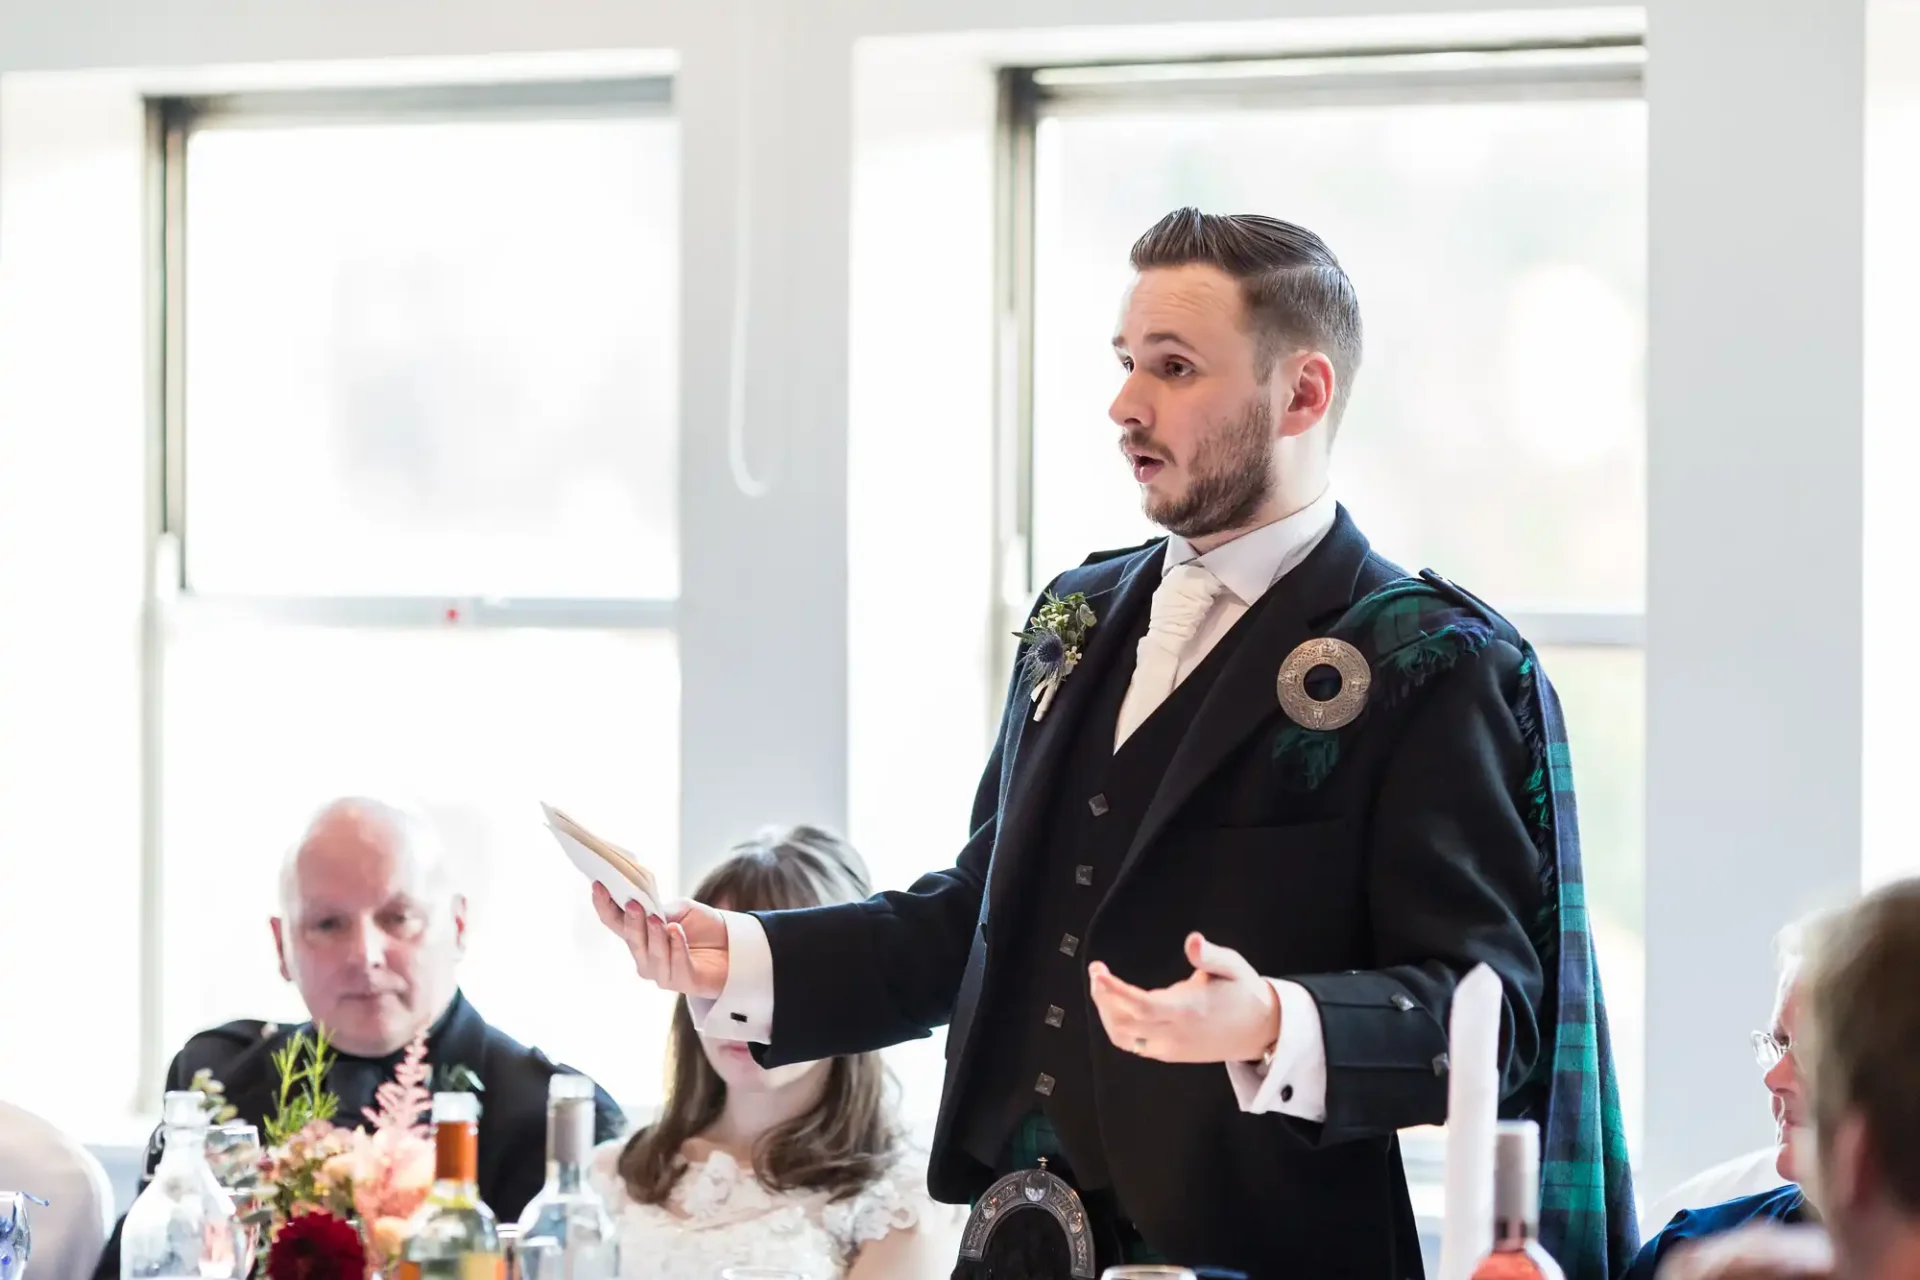 A man in a kilt and suit jacket giving a speech at a wedding reception, holding a note card, with guests seated around tables.